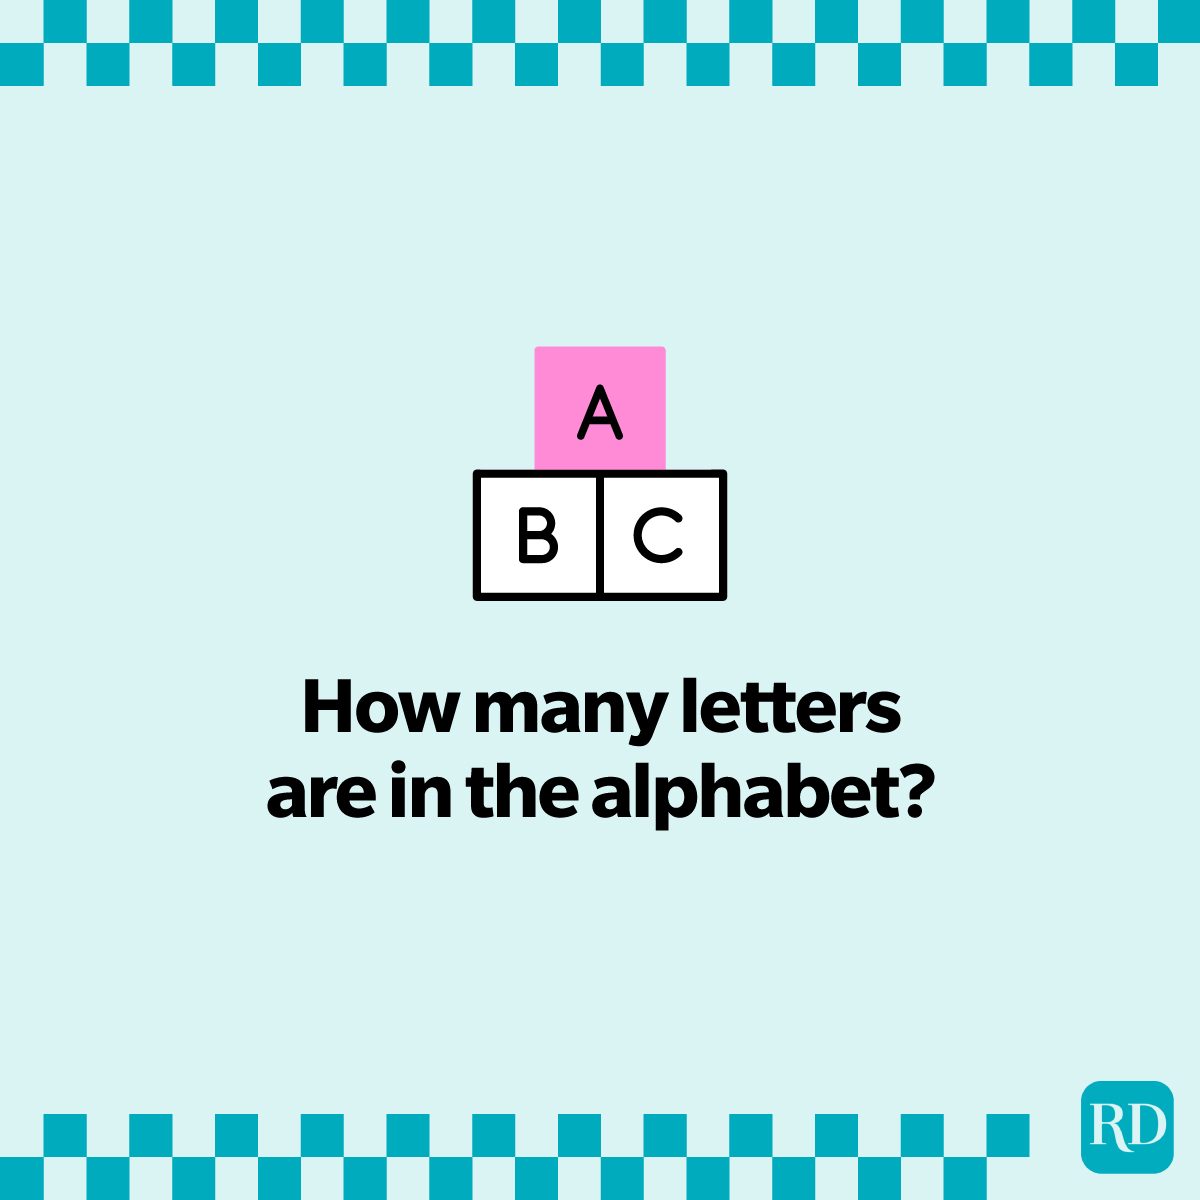 How Many Letters Are in the Alphabet: Try to Solve the Viral Riddle